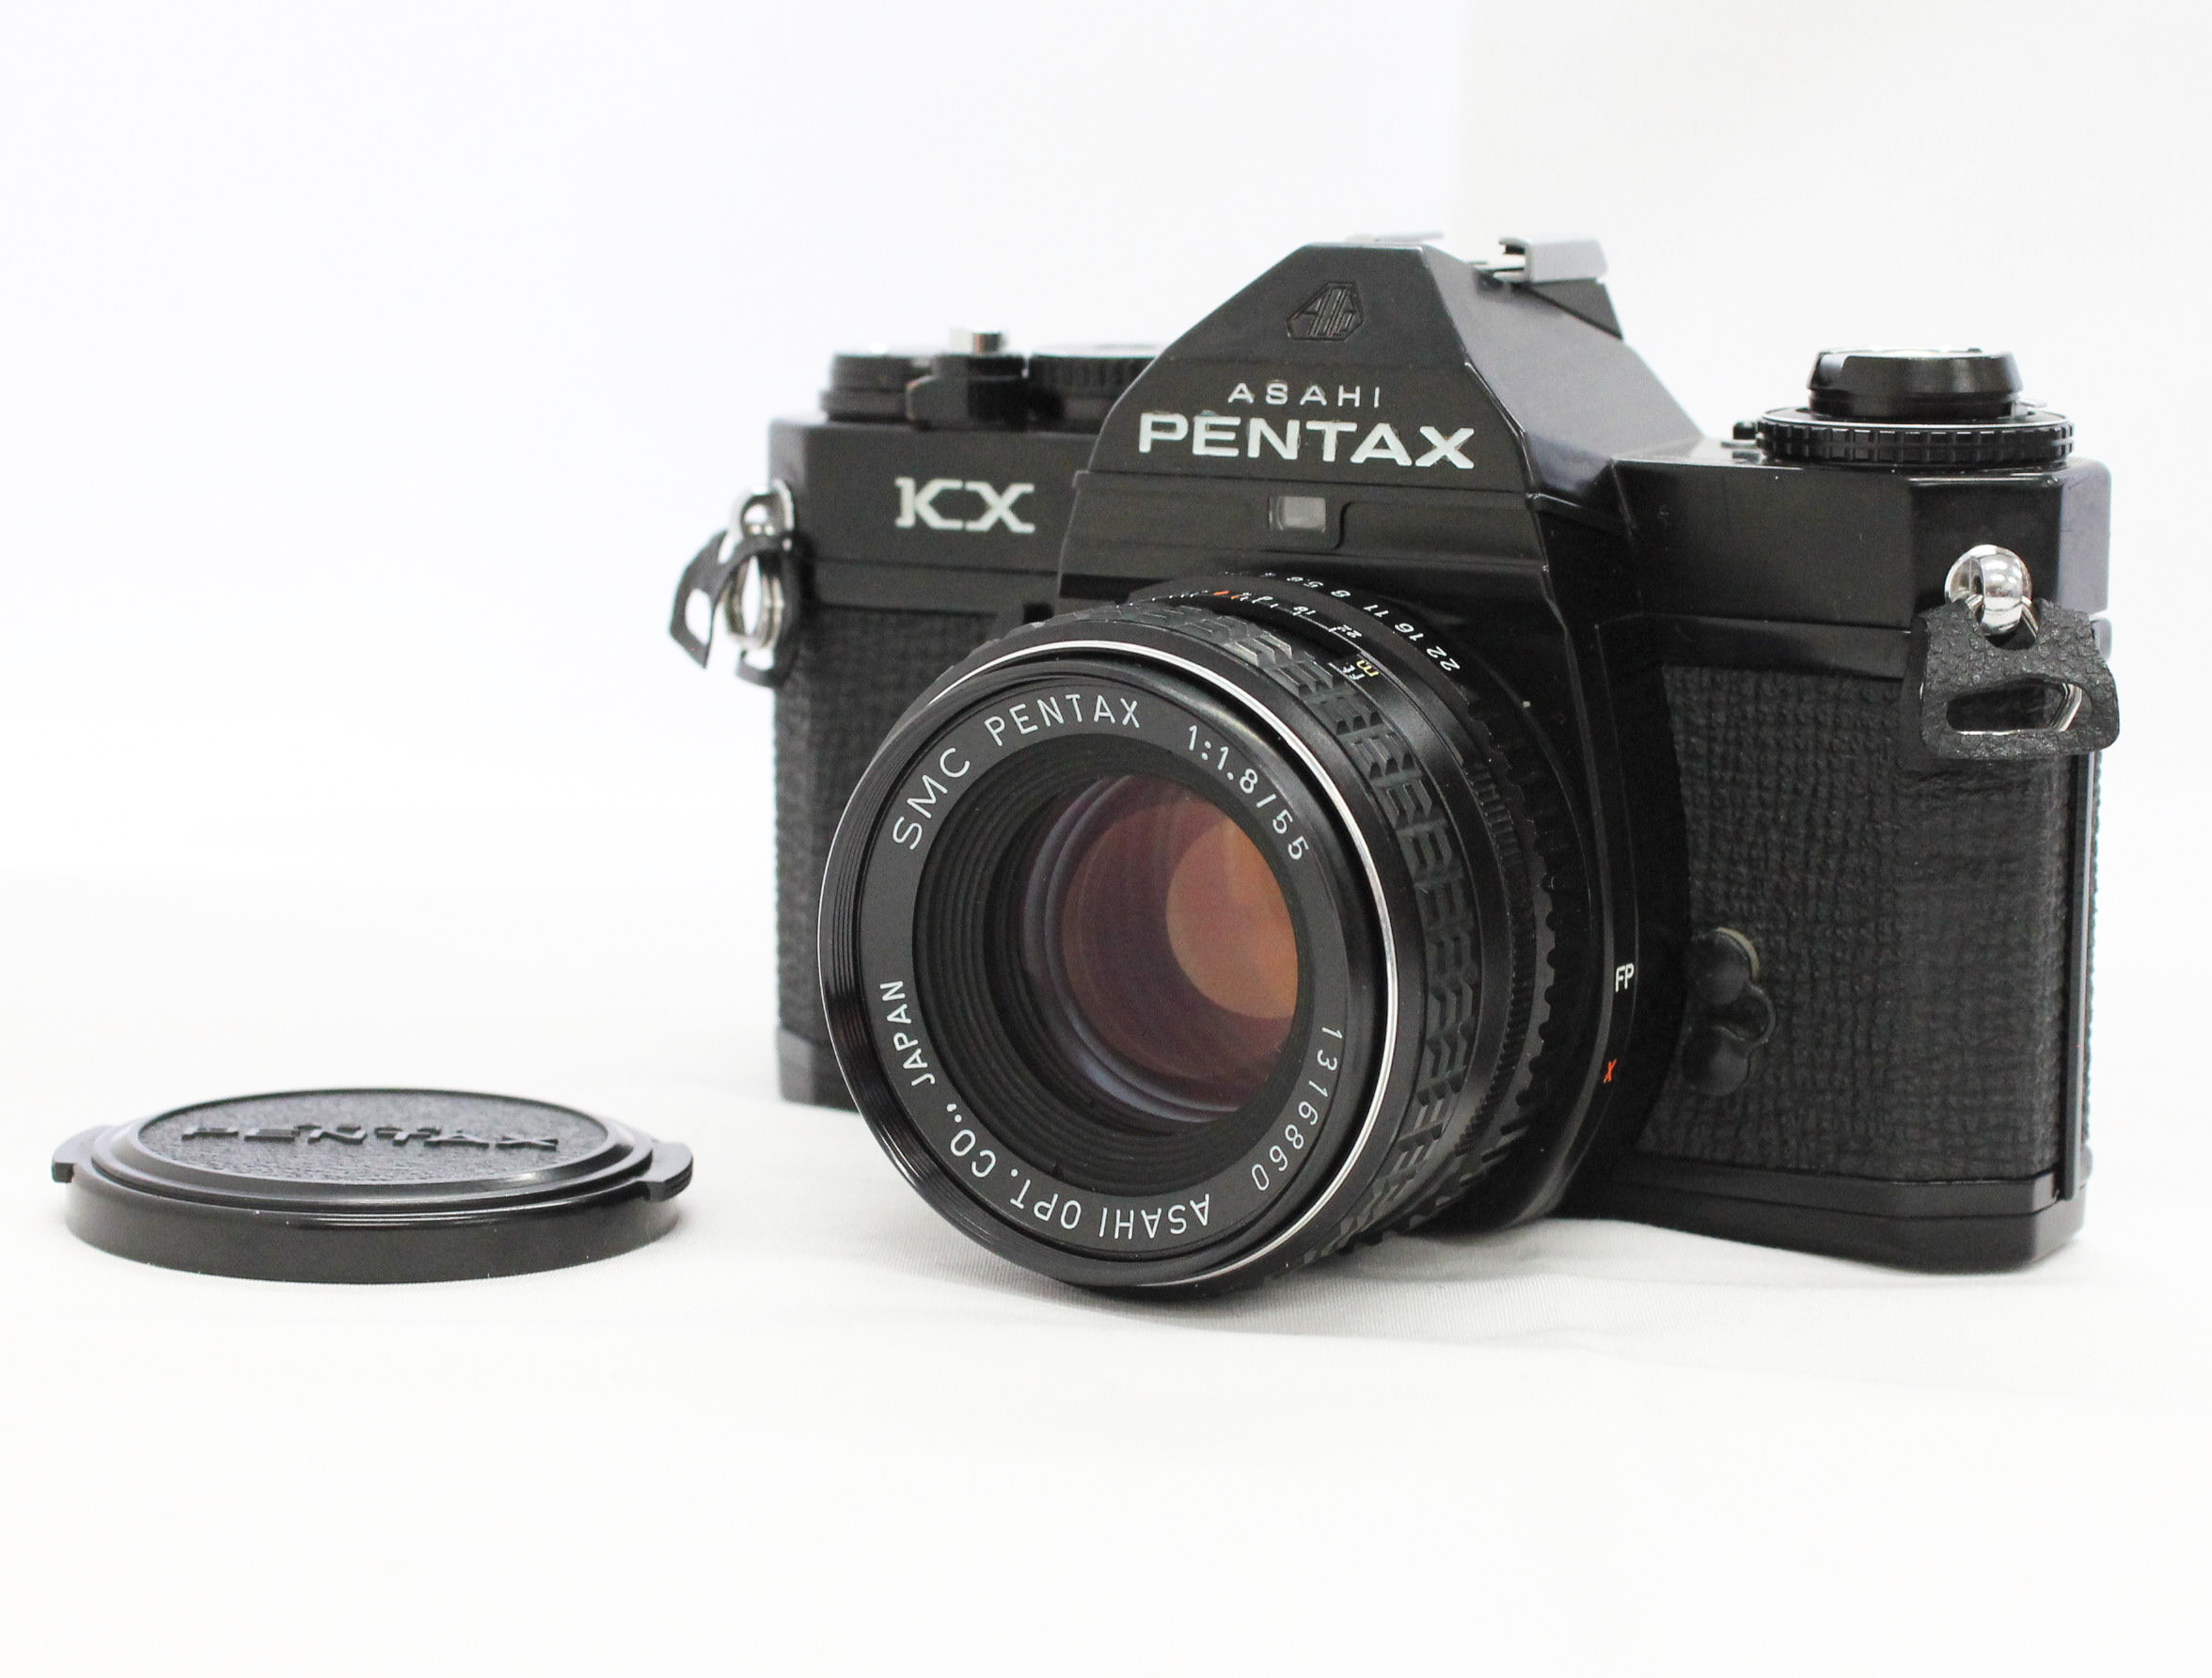 Japan Used Camera Shop | [Excellent+++++] Pentax KX Black with SMC Pentax 55mm F/1.8 Lens from Japan